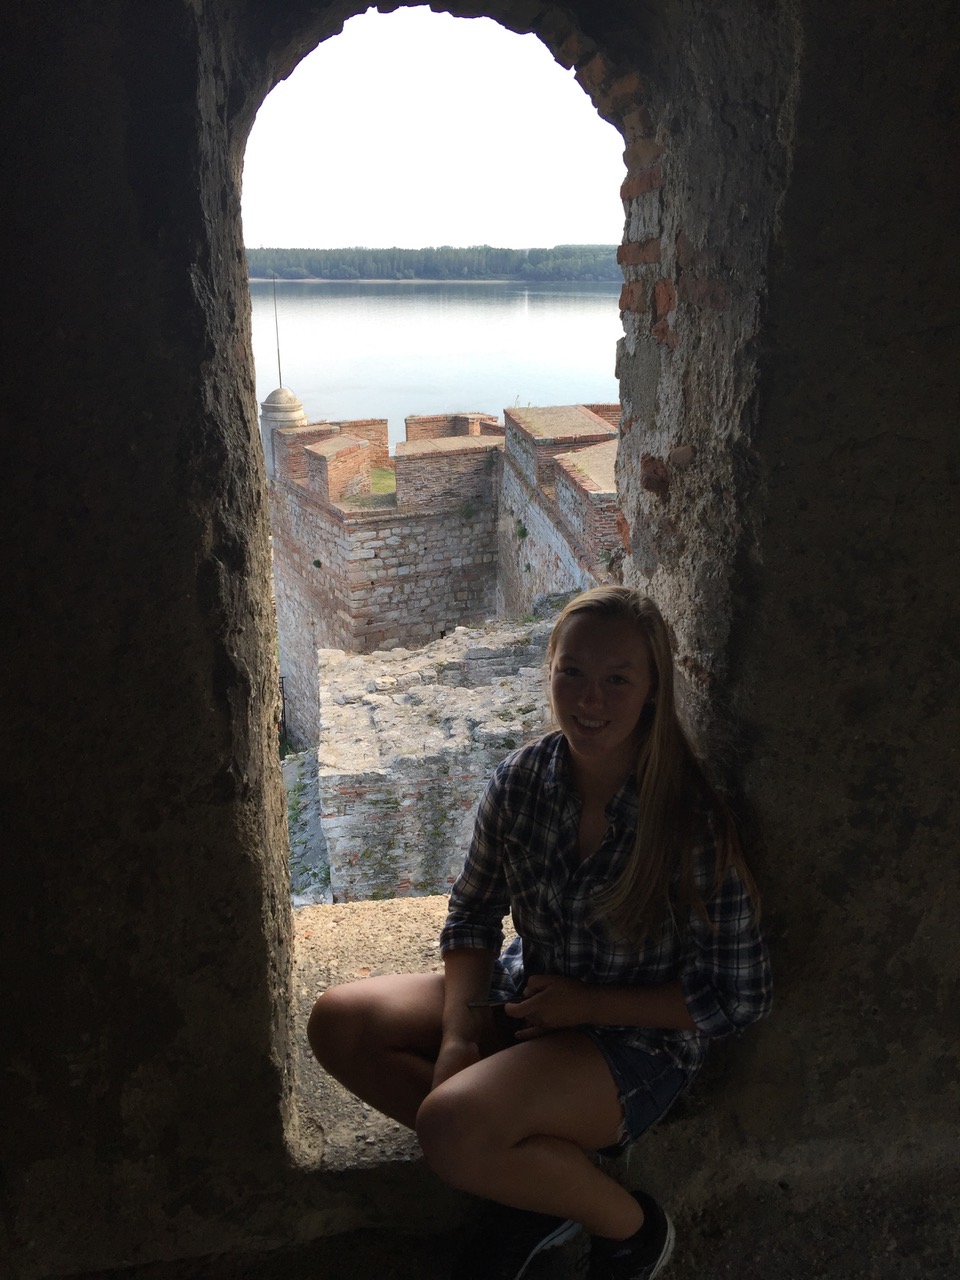 views of the fortress wall and Danube river through a narrow rounded window